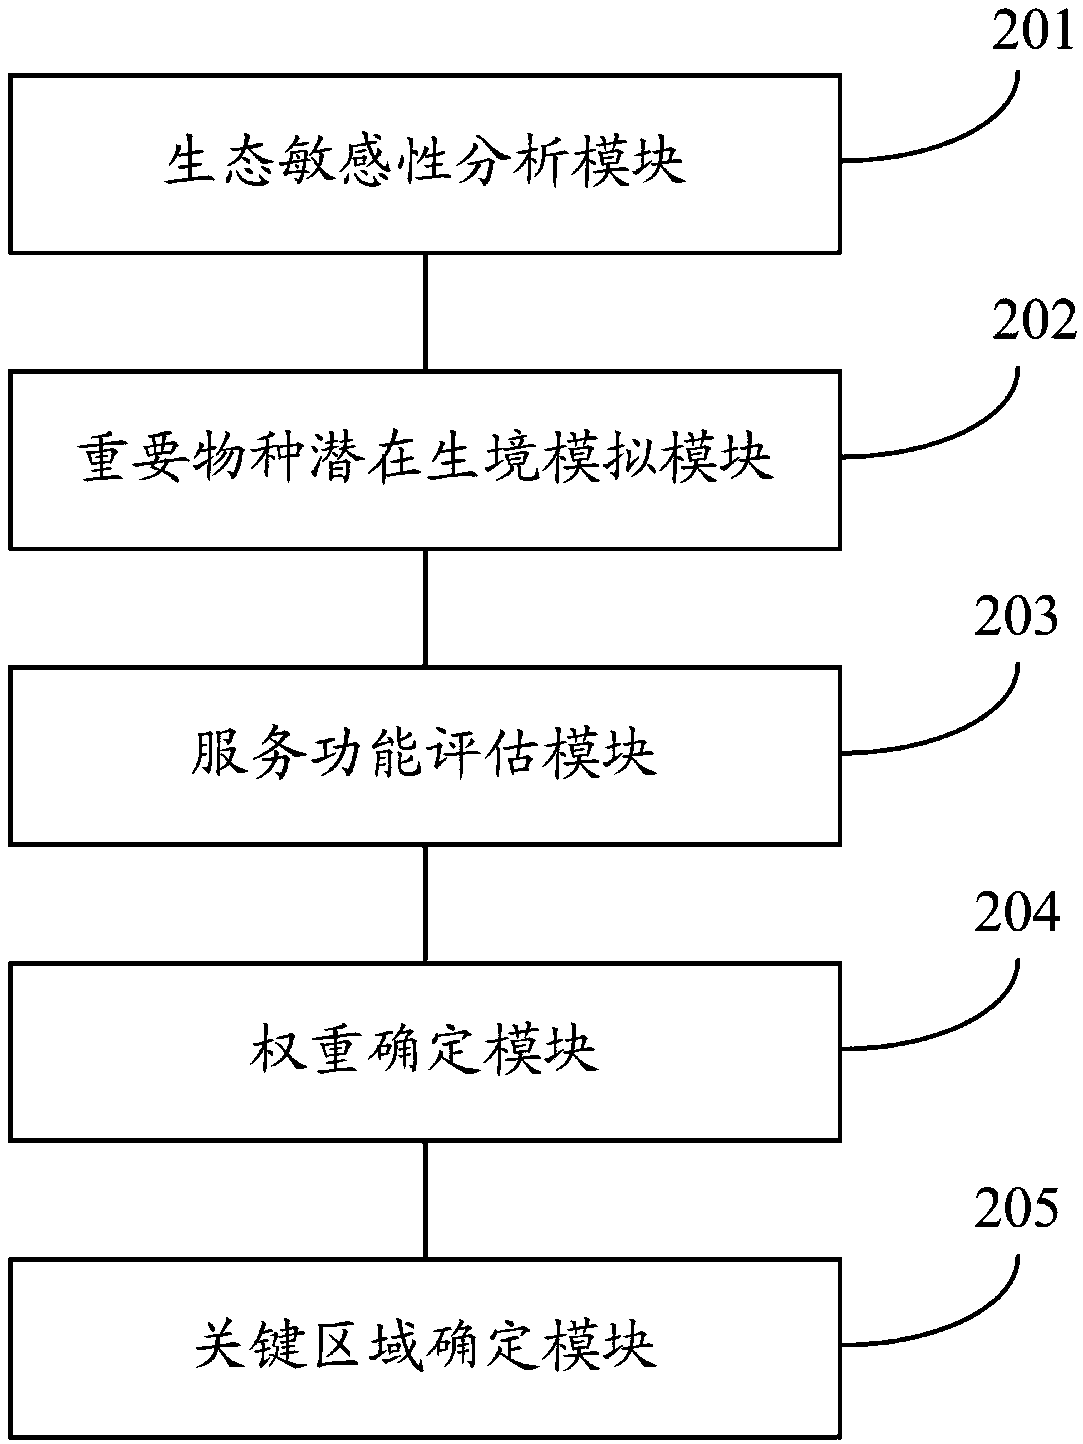 Method and system for determining biodiversity protection critical area